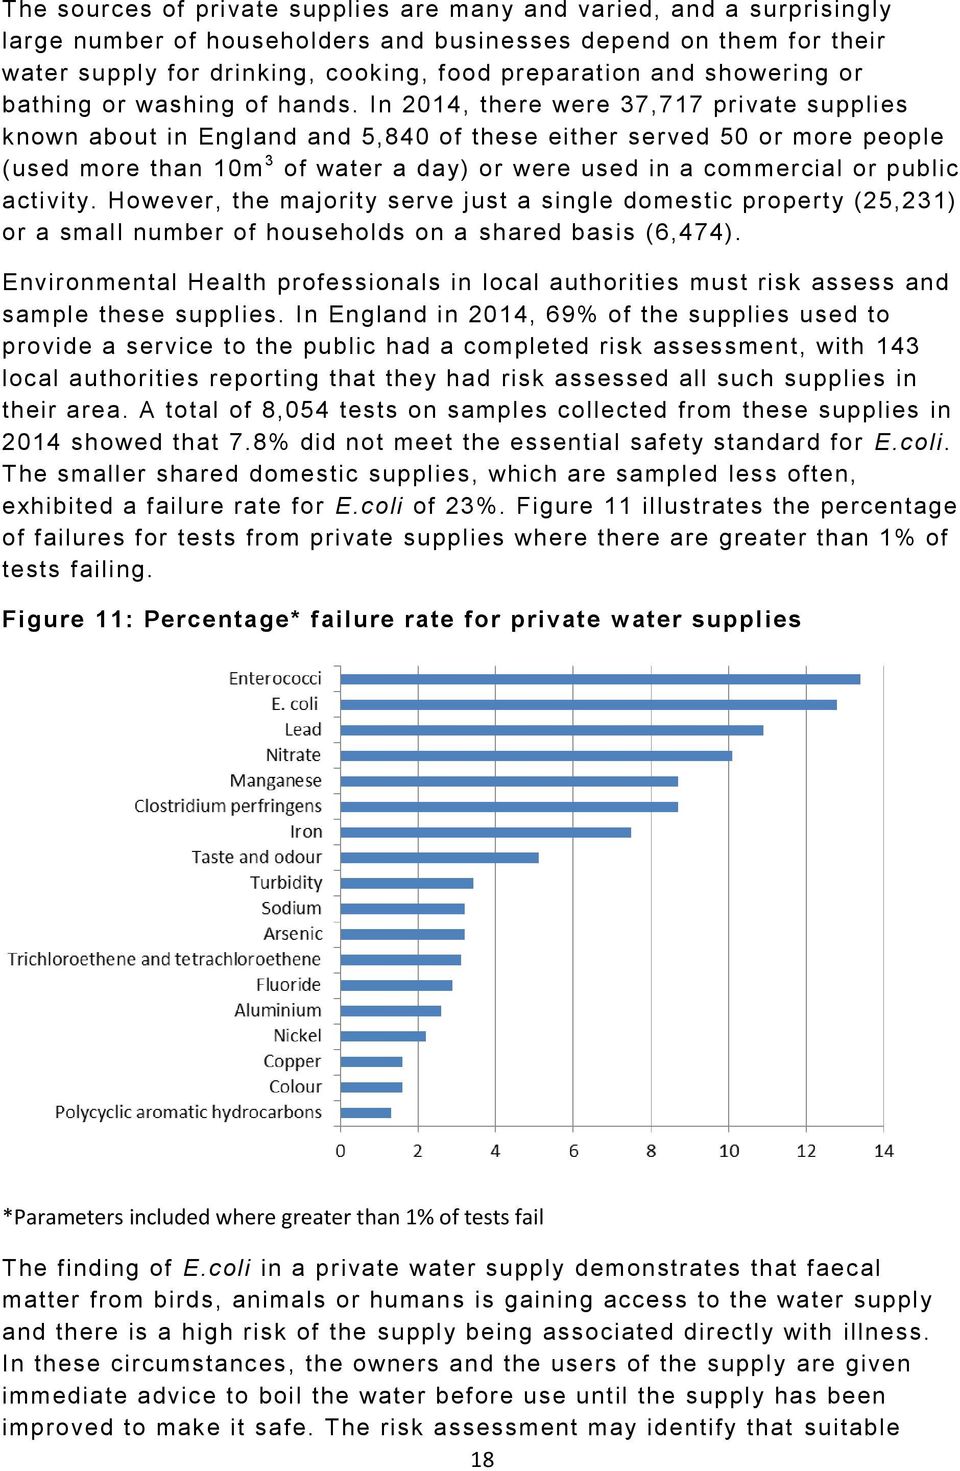 In 2014, there were 37,717 private supplies known about in England and 5,840 of these either served 50 or more people (used more than 10m 3 of water a day) or were used in a commercial or public